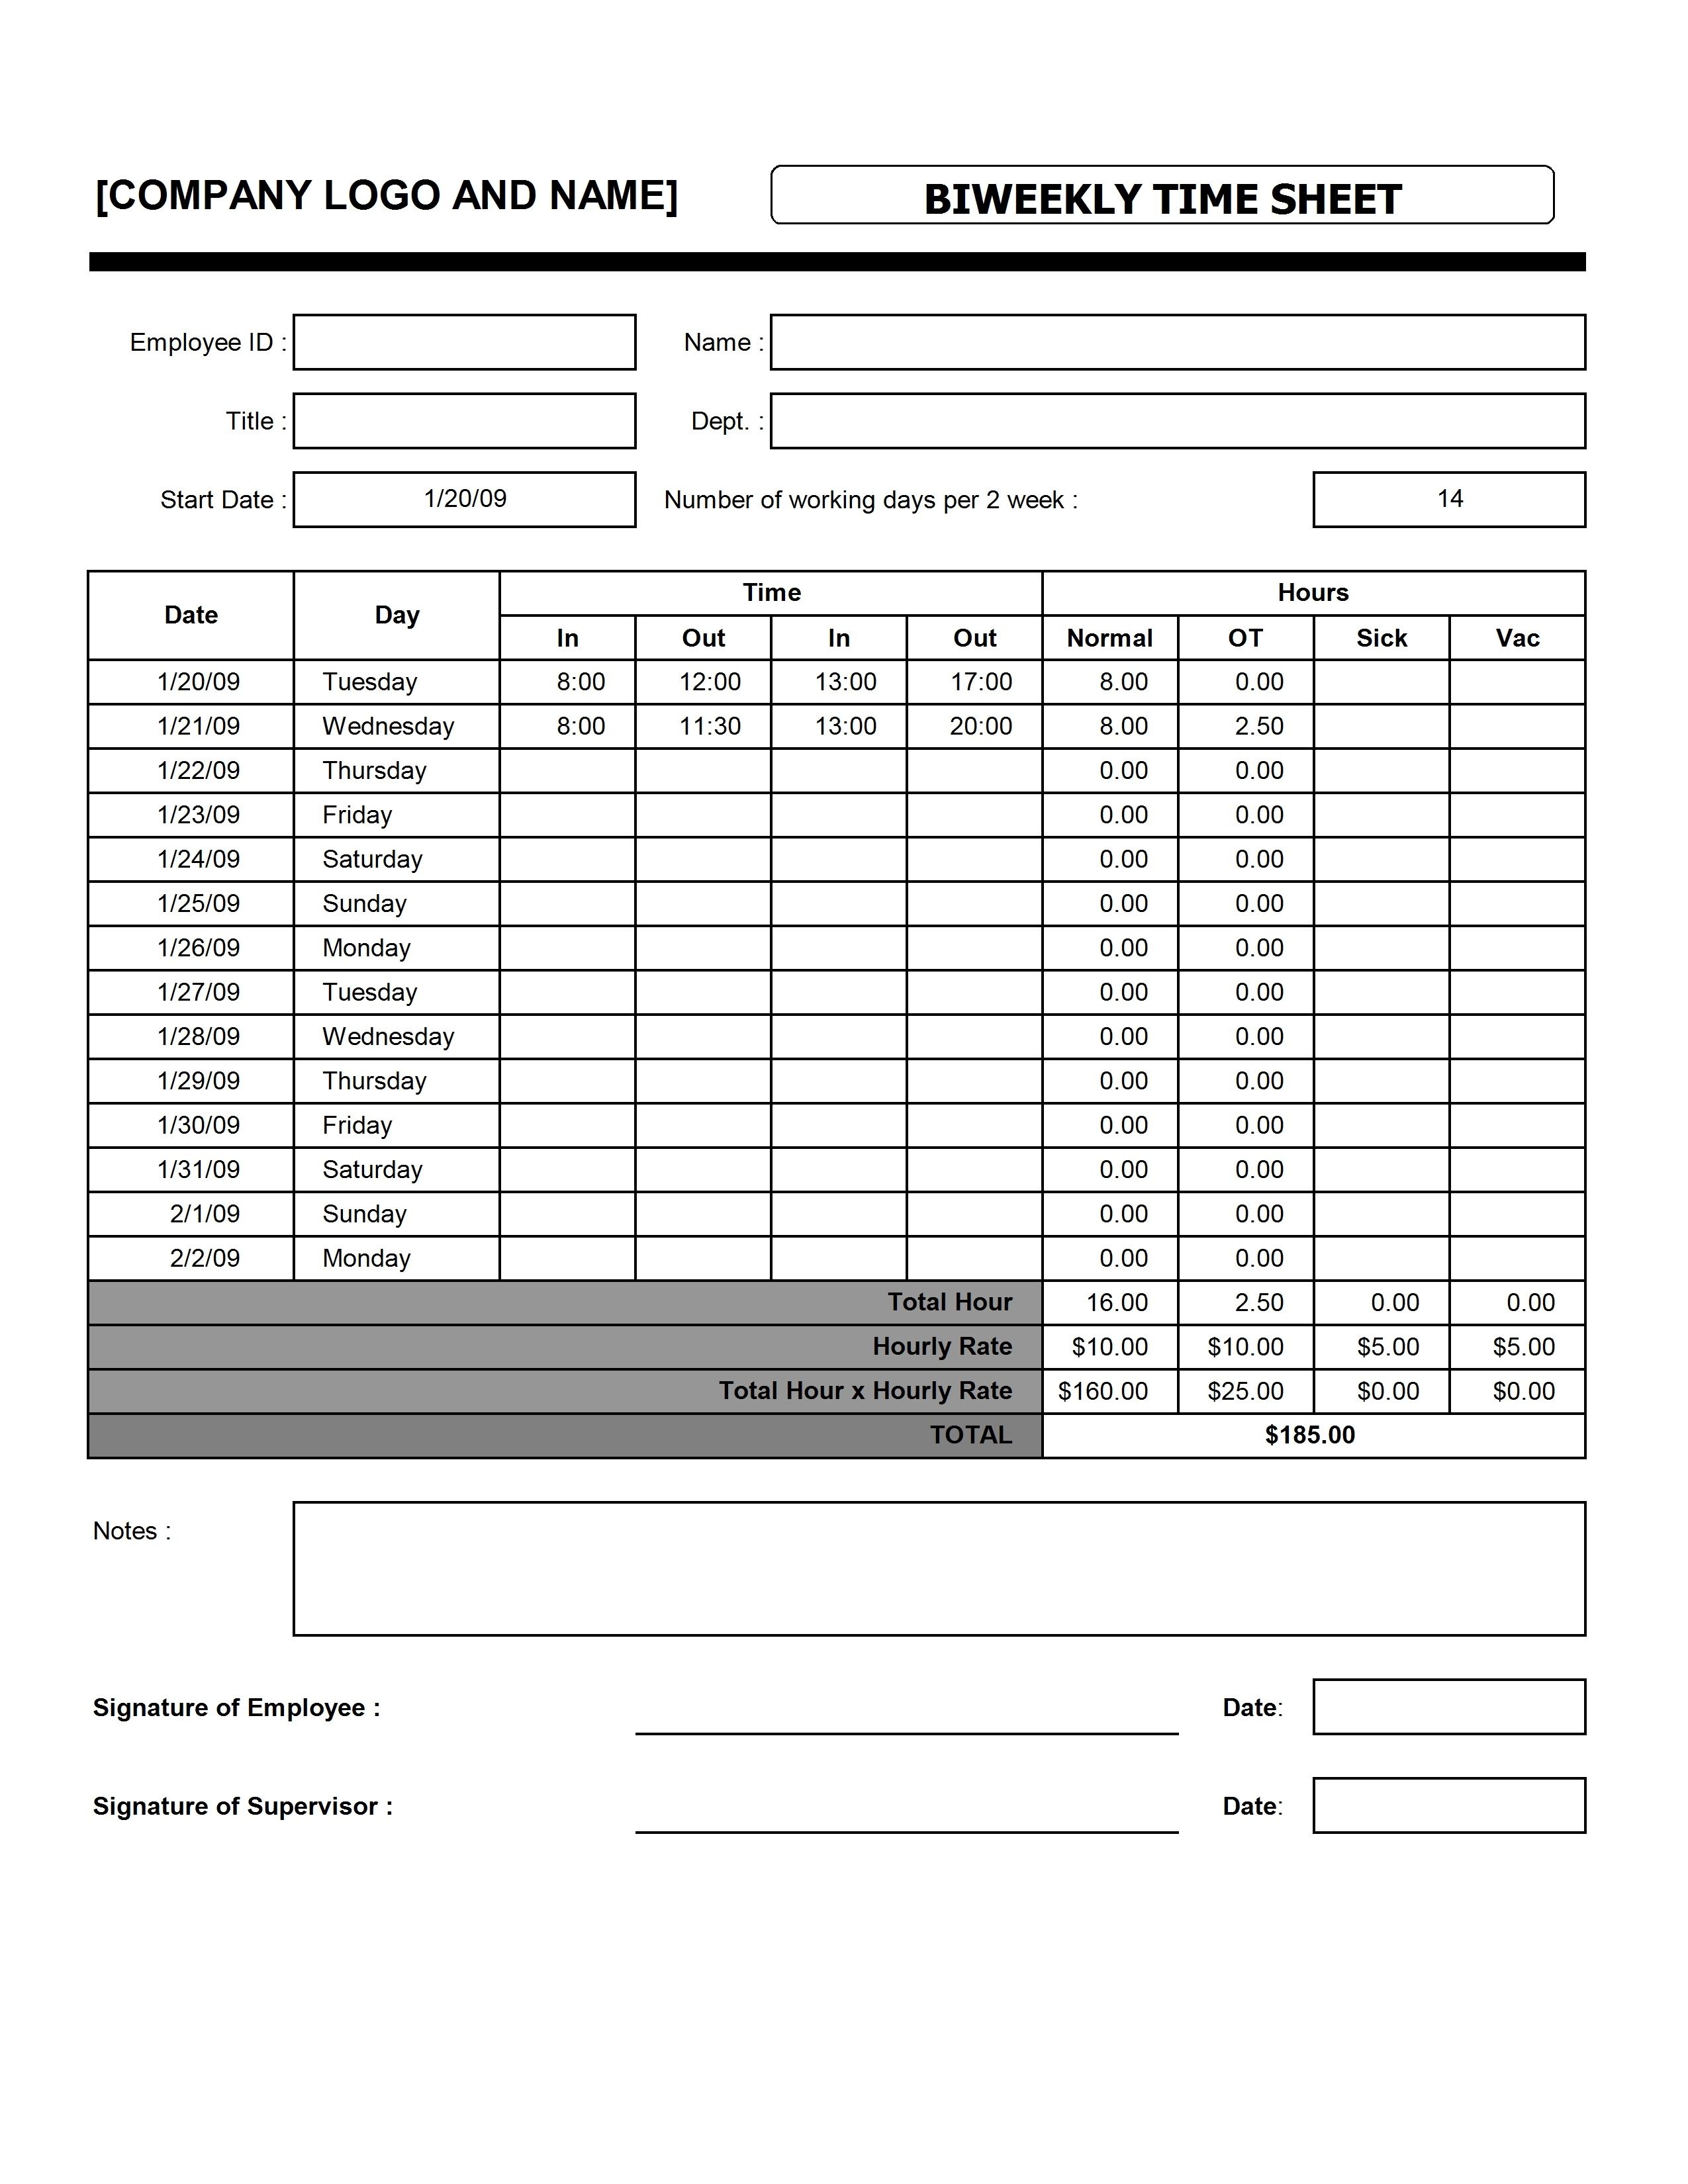 Free Printable Timesheets - Google Search | Excel Stuff | Timesheet - Timesheet Template Free Printable